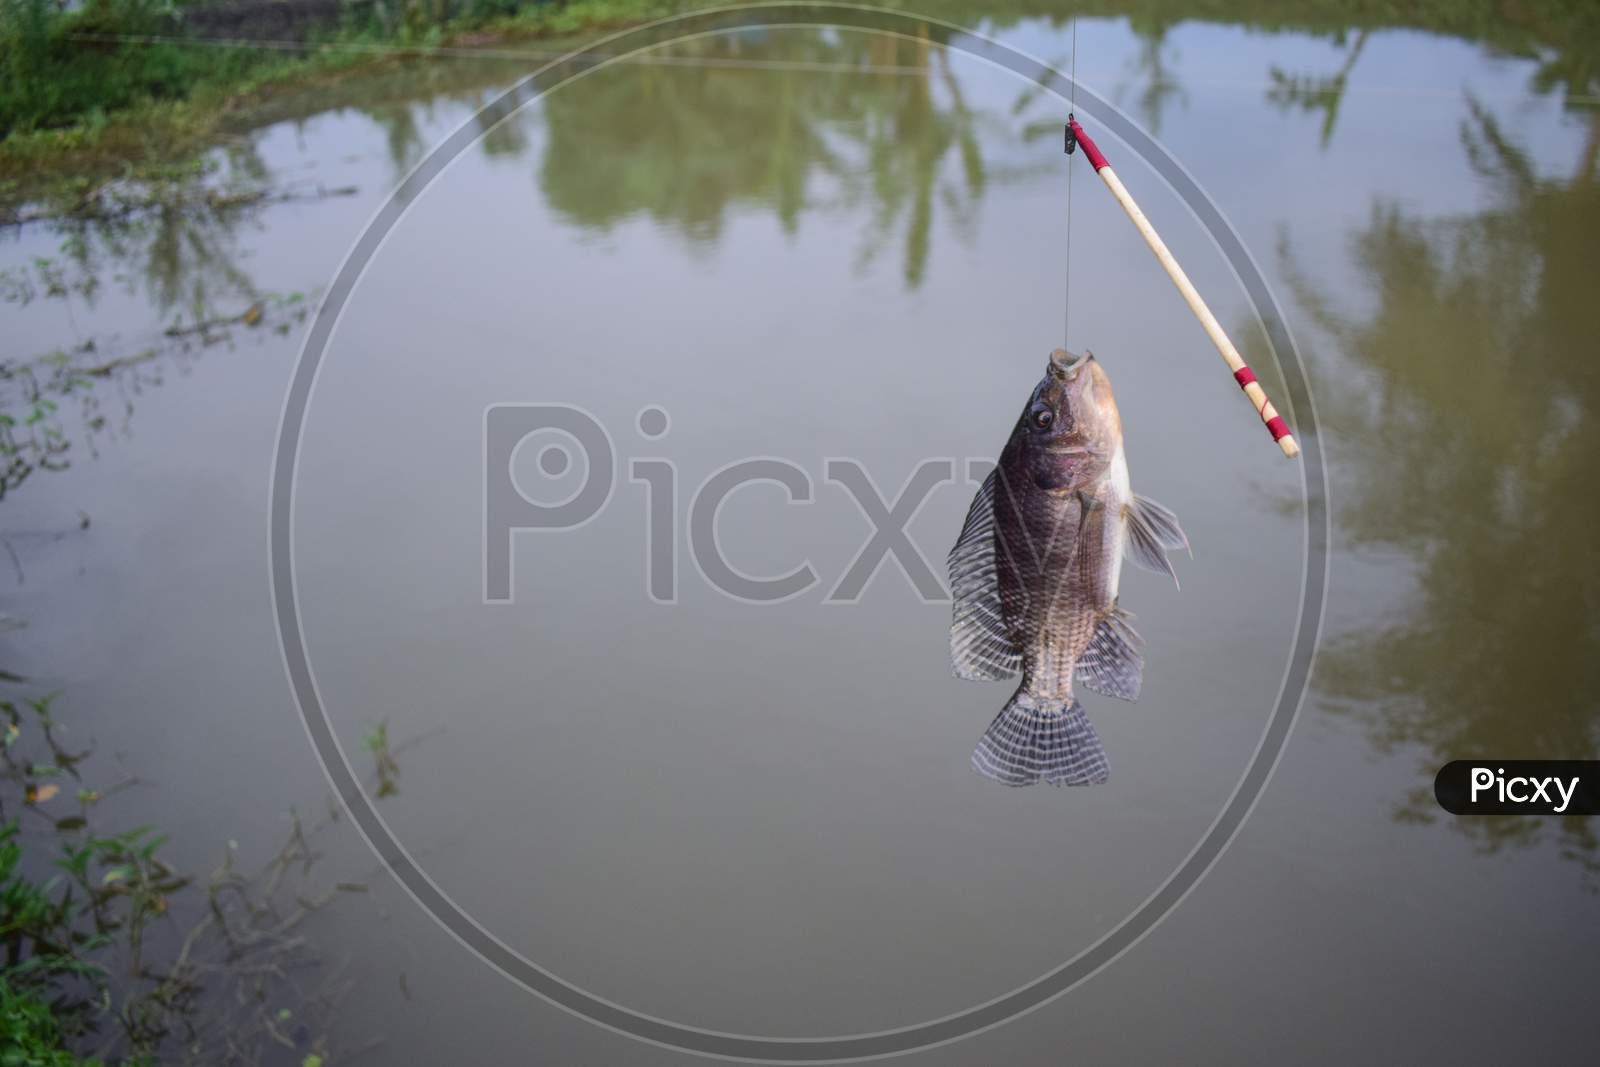 A Fish Hang-On Hook With Floater .Catching Fish With Fishing Rod And Fishhook .